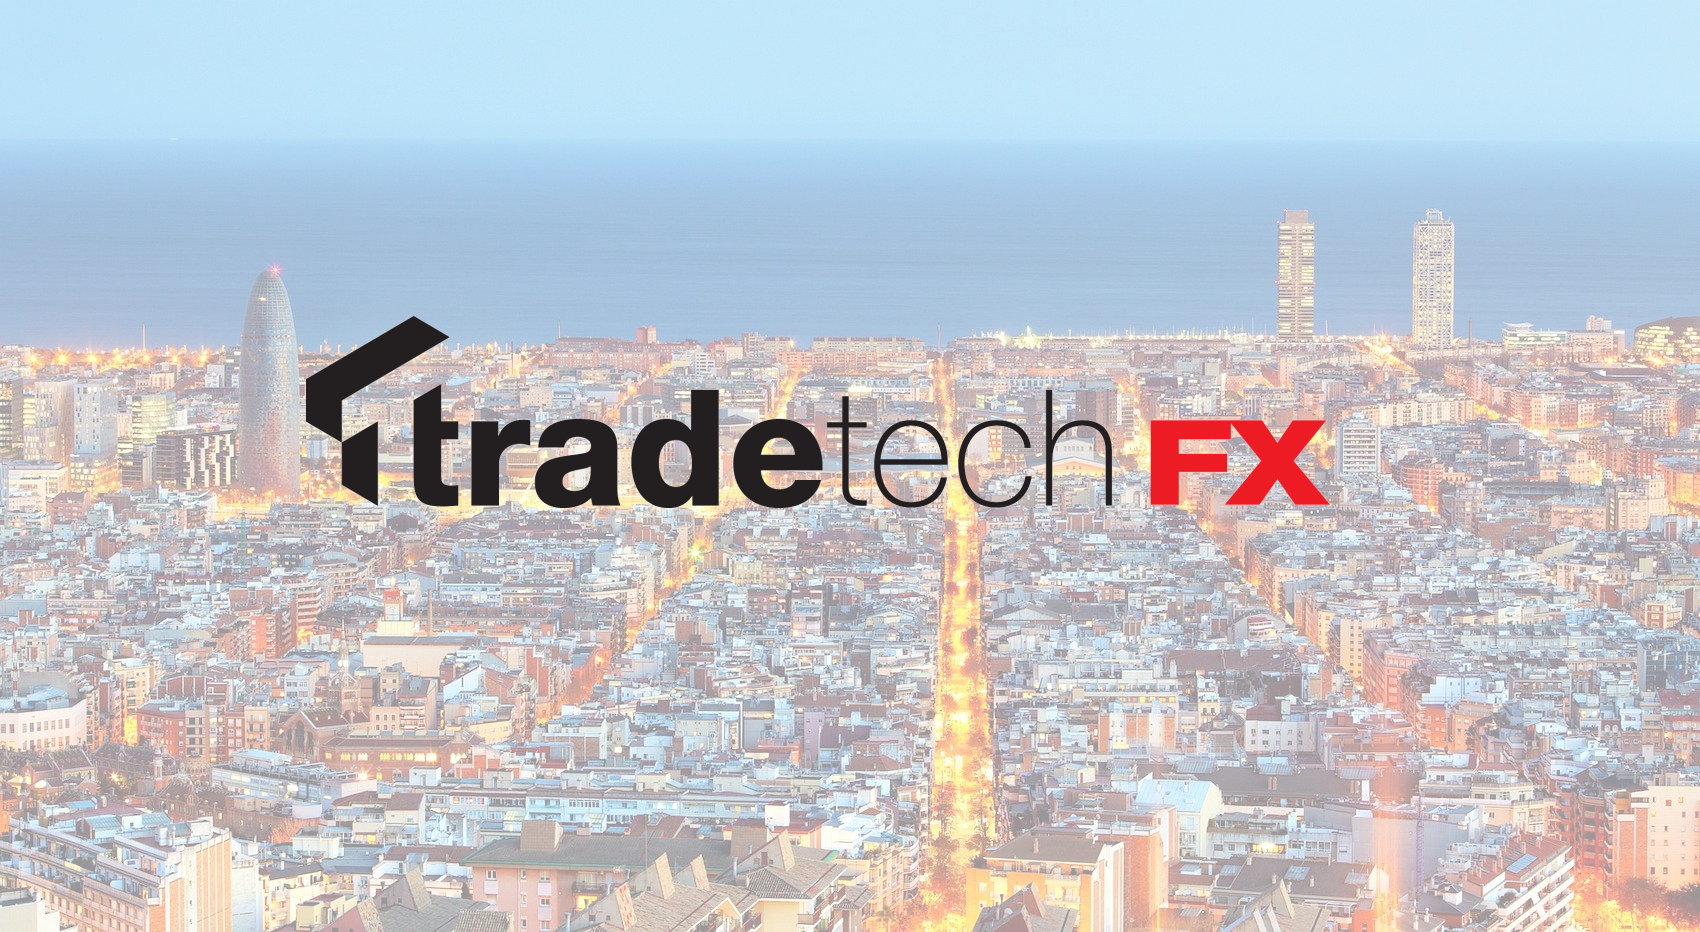 ipushpull presenting at TradeTech FX Europe 2018 in Barcelona